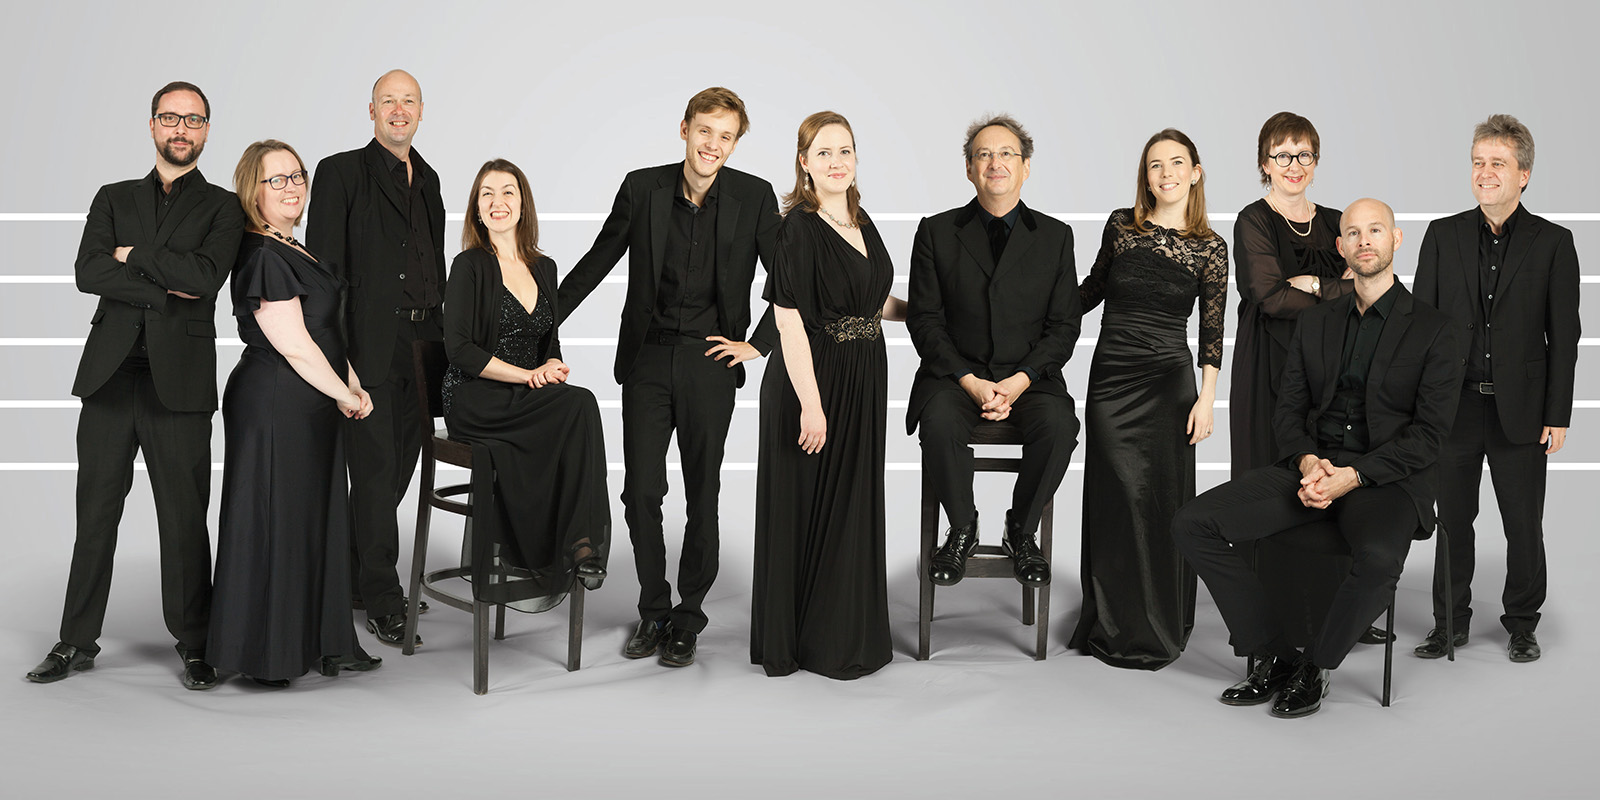 Eleven men and women wearing black suites and dresses stand and sit on tall stools in front of a white and grey background.